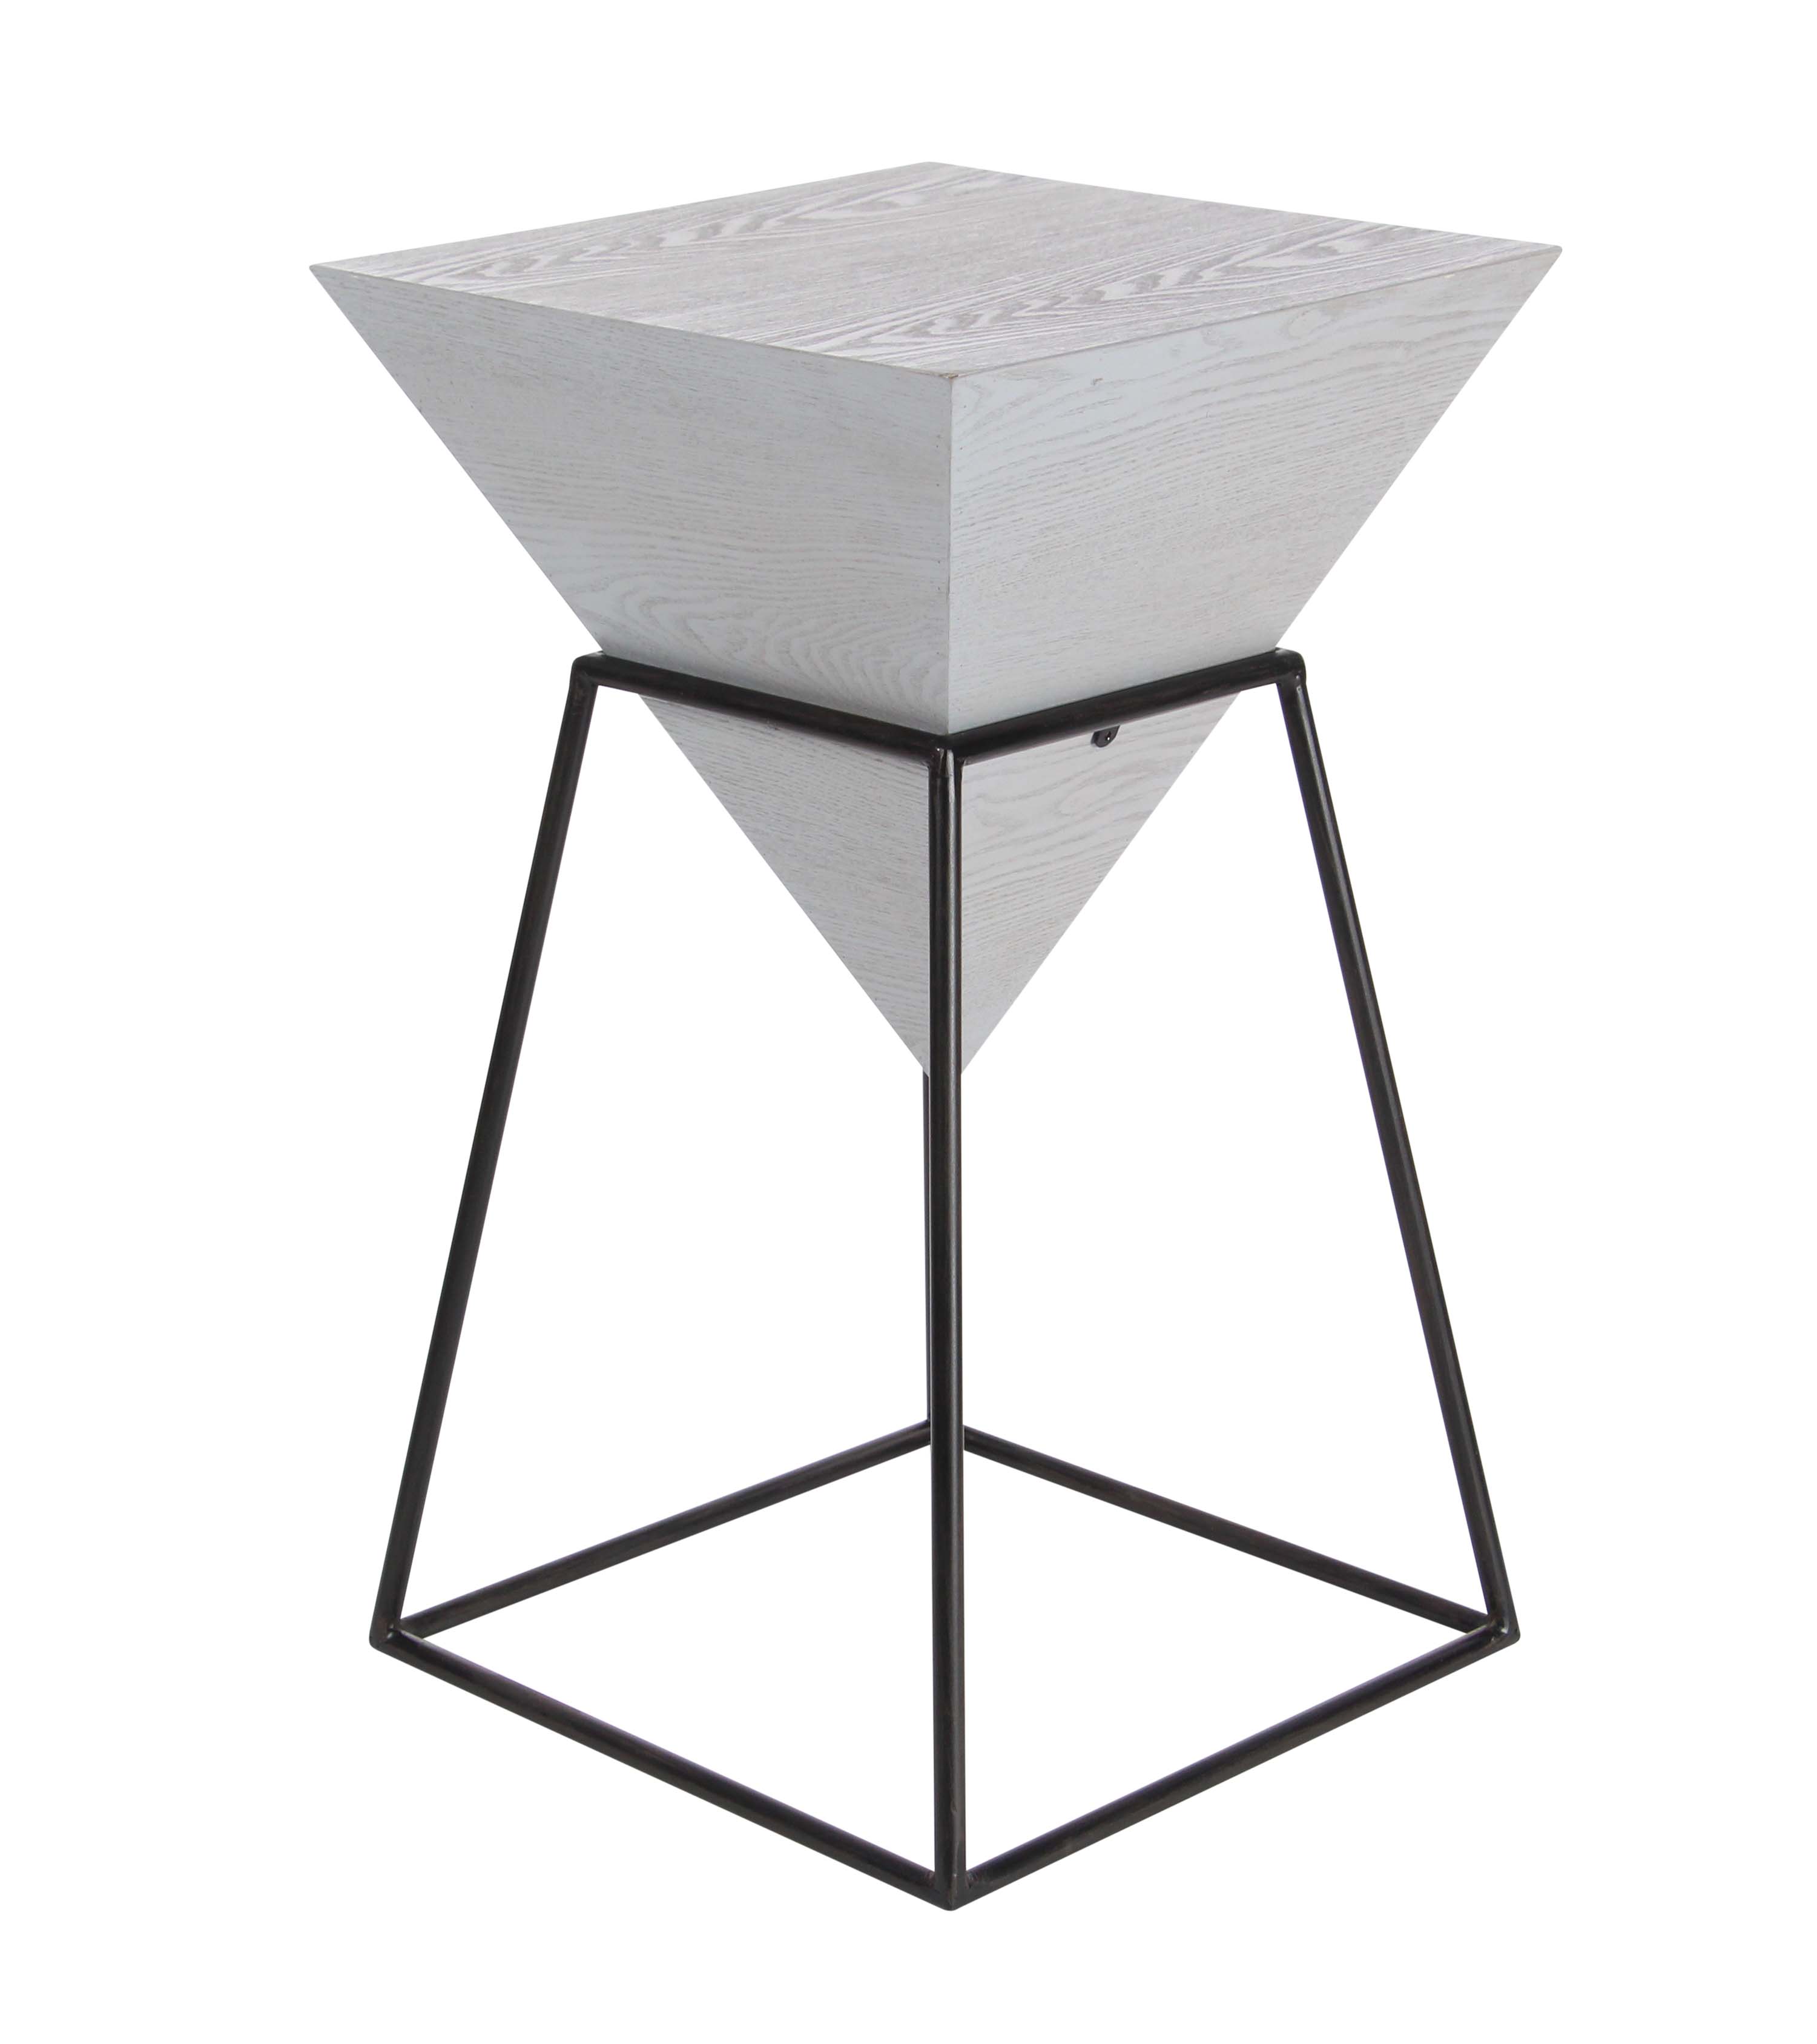 decmode modern inch white wood and metal pyramid accent table outdoor tables ceiling chandelier shabby chic bedside furniture coffee end retro oak side lamp combo blue chair with